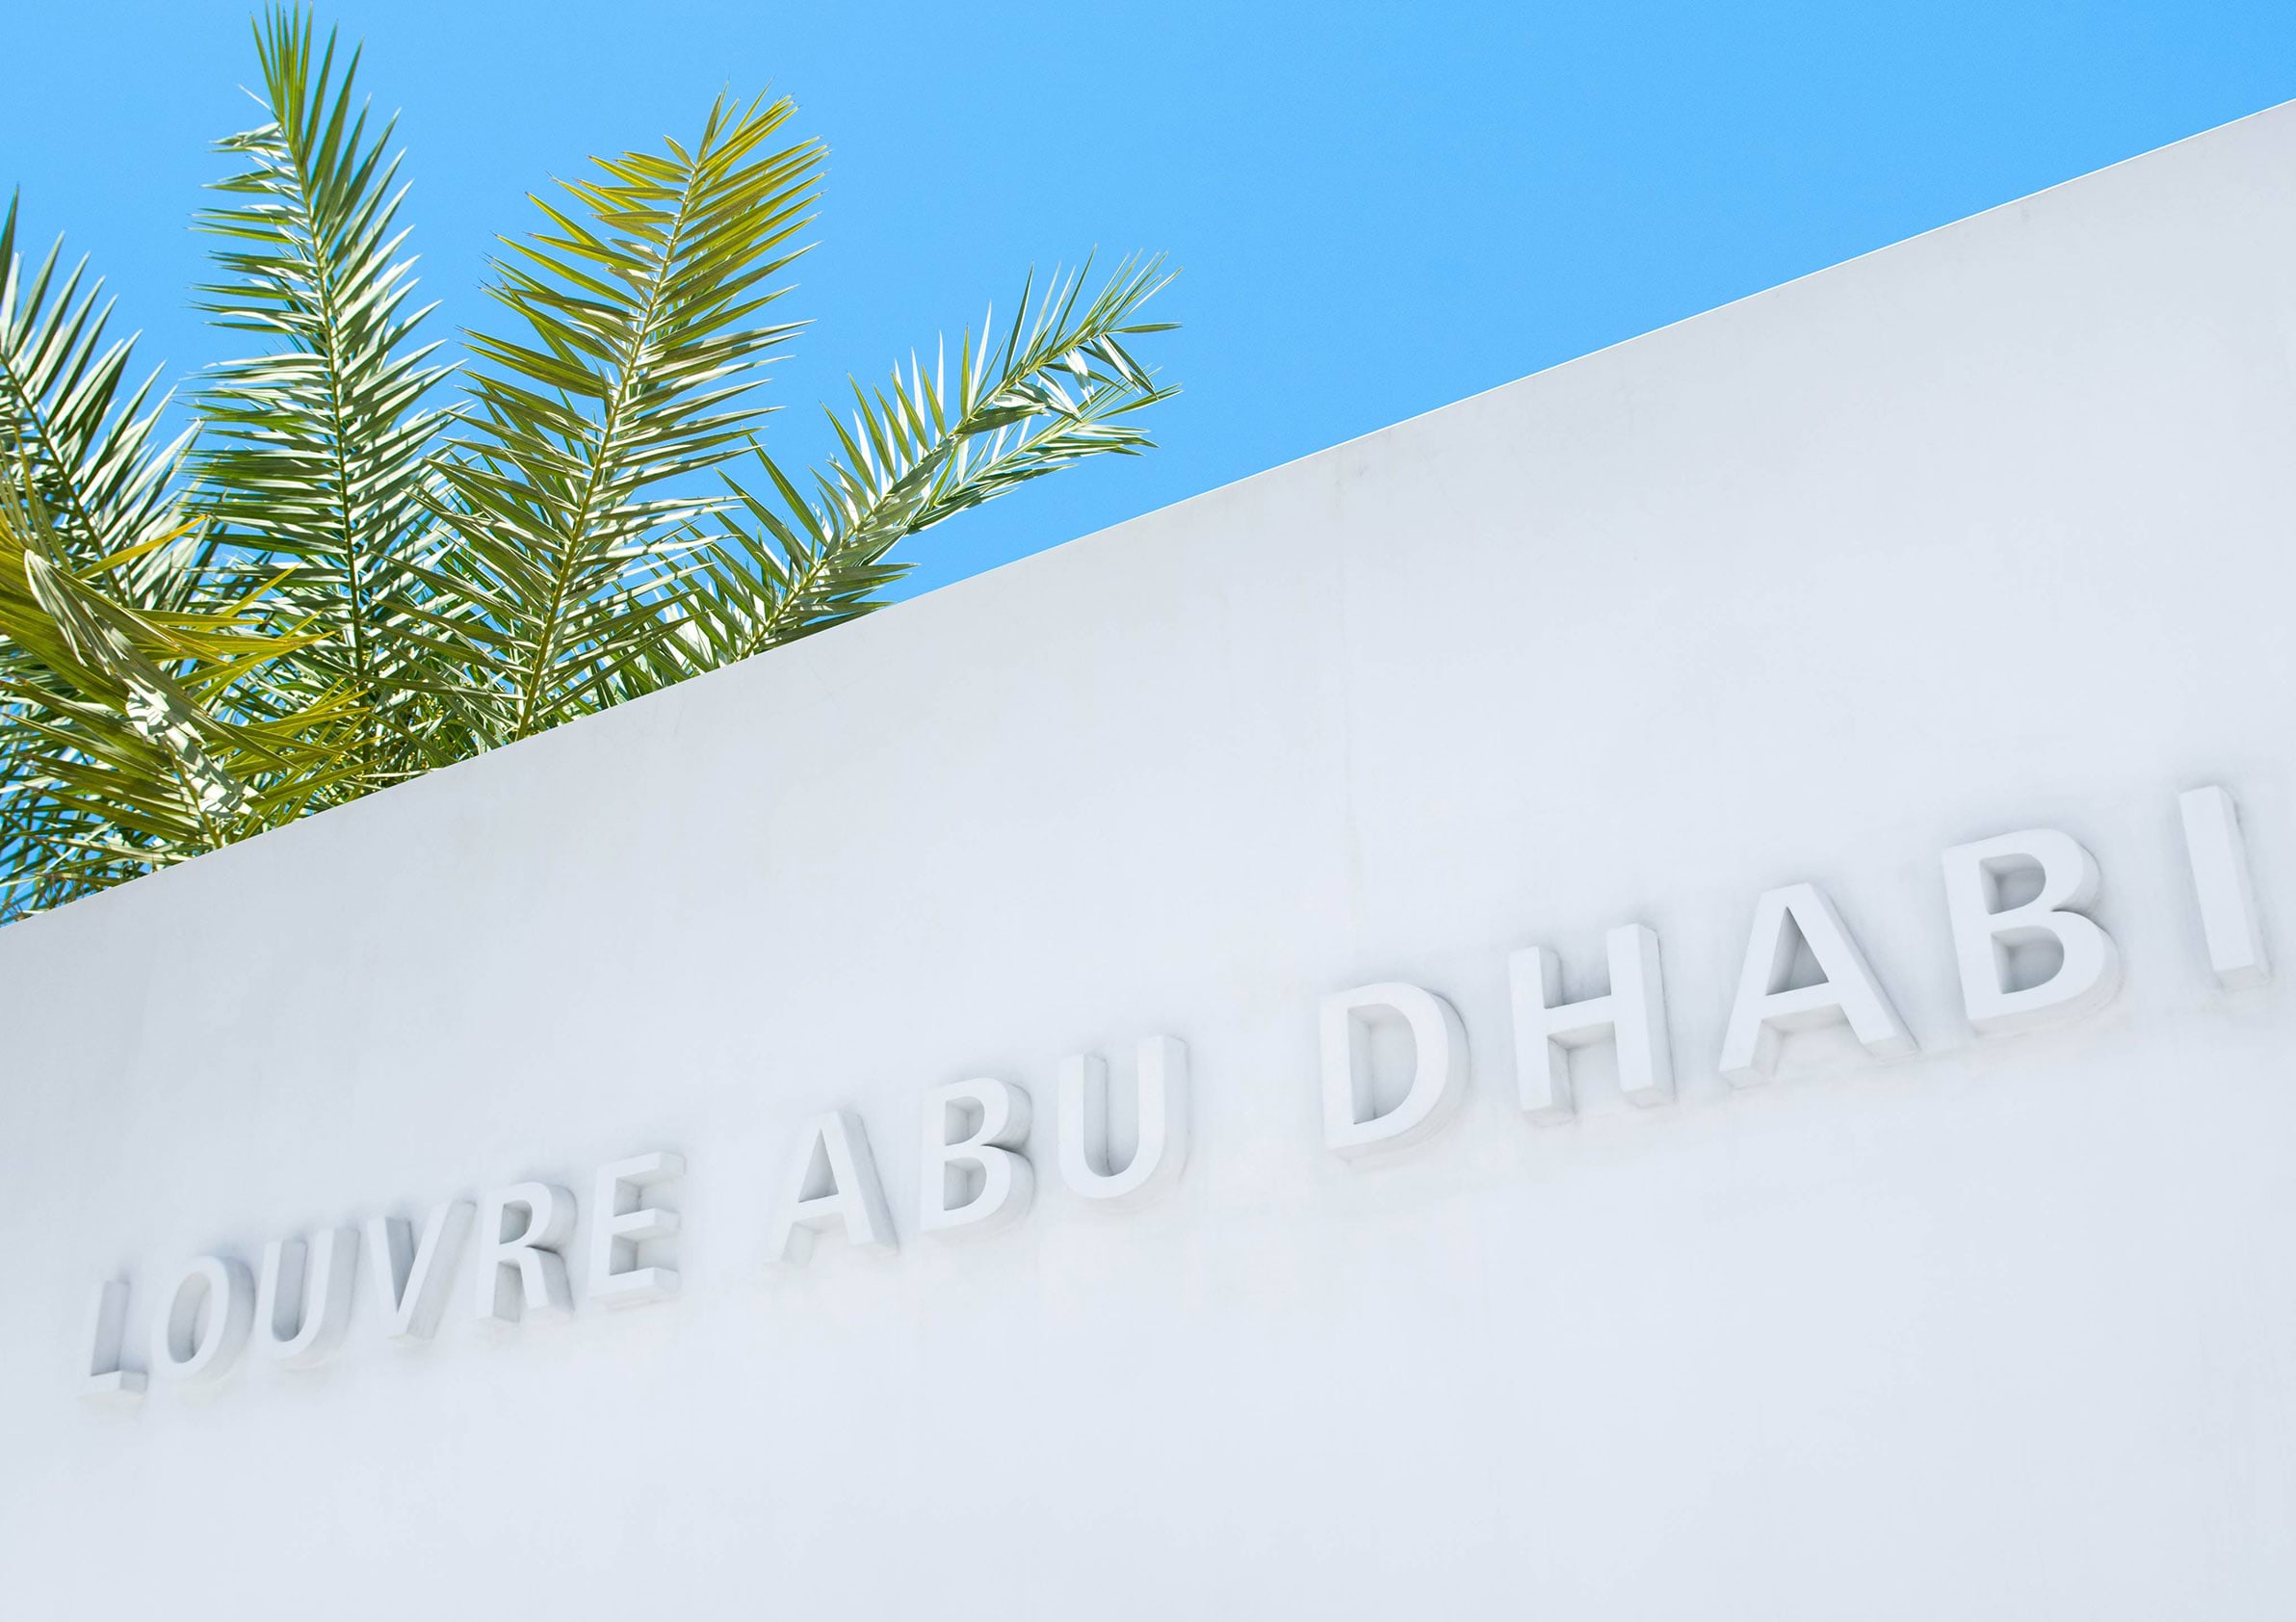 Creating an Impression with Mapei- Louvre Abu Dhabi